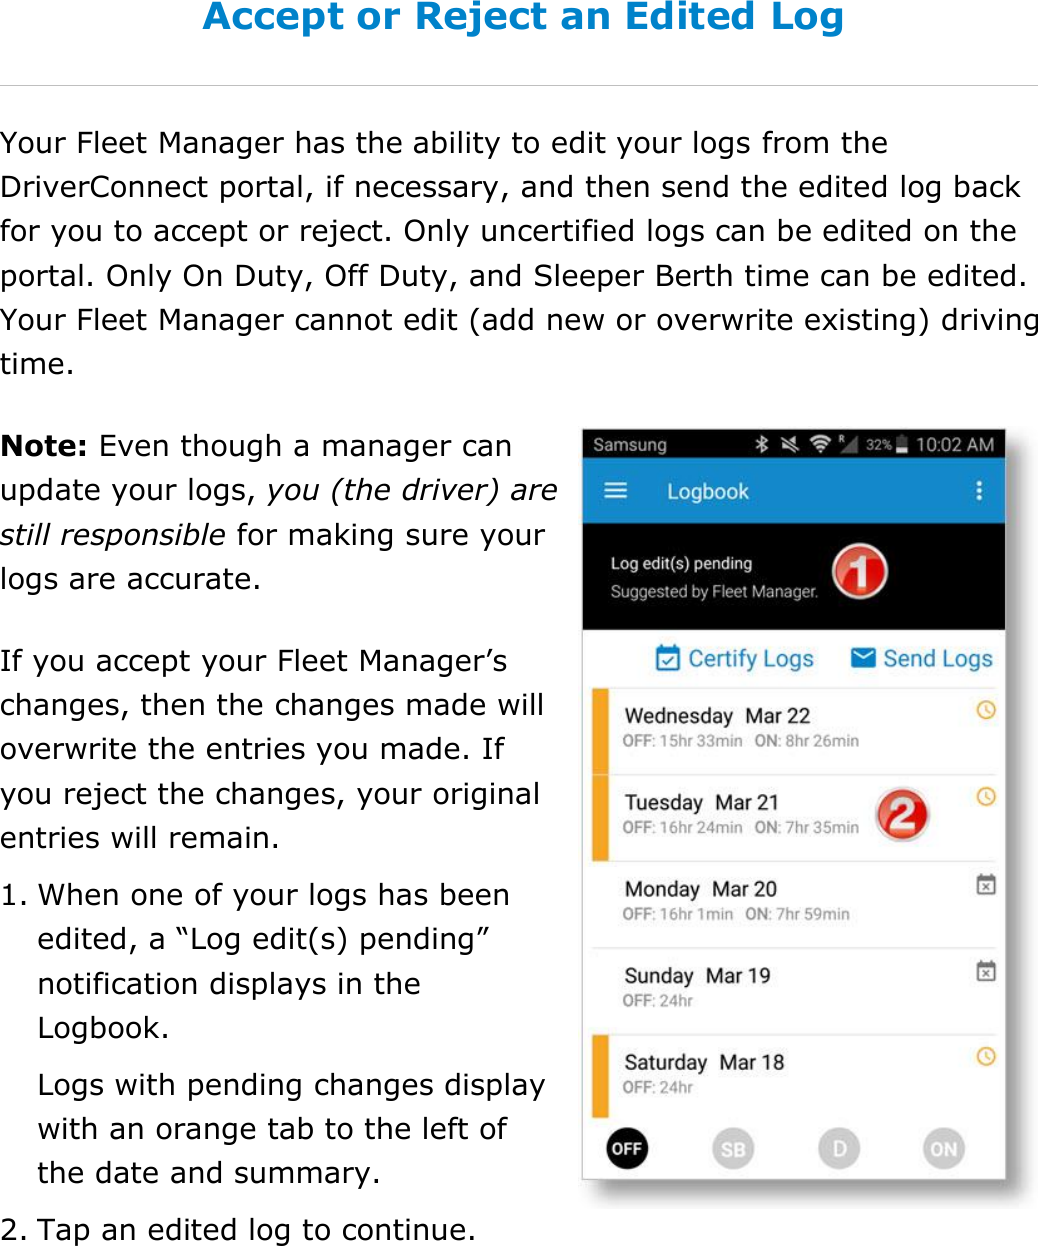 Manage My Logbook DriverConnect User Guide  44 © 2016-2017, Rand McNally, Inc. Accept or Reject an Edited Log Your Fleet Manager has the ability to edit your logs from the DriverConnect portal, if necessary, and then send the edited log back for you to accept or reject. Only uncertified logs can be edited on the portal. Only On Duty, Off Duty, and Sleeper Berth time can be edited. Your Fleet Manager cannot edit (add new or overwrite existing) driving time. Note: Even though a manager can update your logs, you (the driver) are still responsible for making sure your logs are accurate. If you accept your Fleet Manager’s changes, then the changes made will overwrite the entries you made. If you reject the changes, your original entries will remain. 1. When one of your logs has been edited, a “Log edit(s) pending” notification displays in the Logbook. Logs with pending changes display with an orange tab to the left of the date and summary. 2. Tap an edited log to continue.     